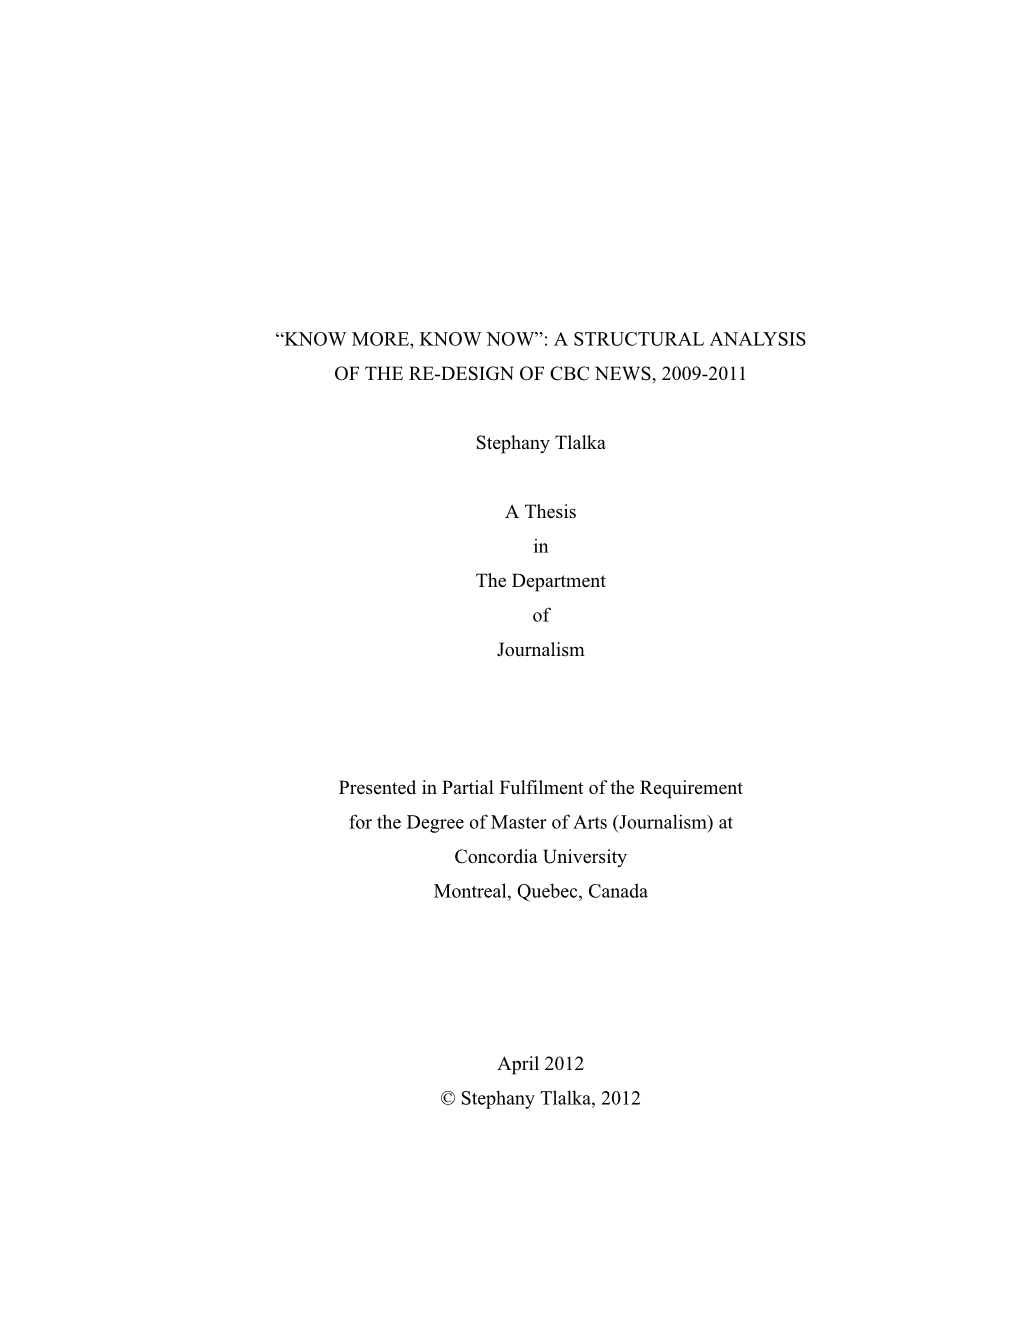 A Structural Analysis of the Re-Design of Cbc News, 2009-2011